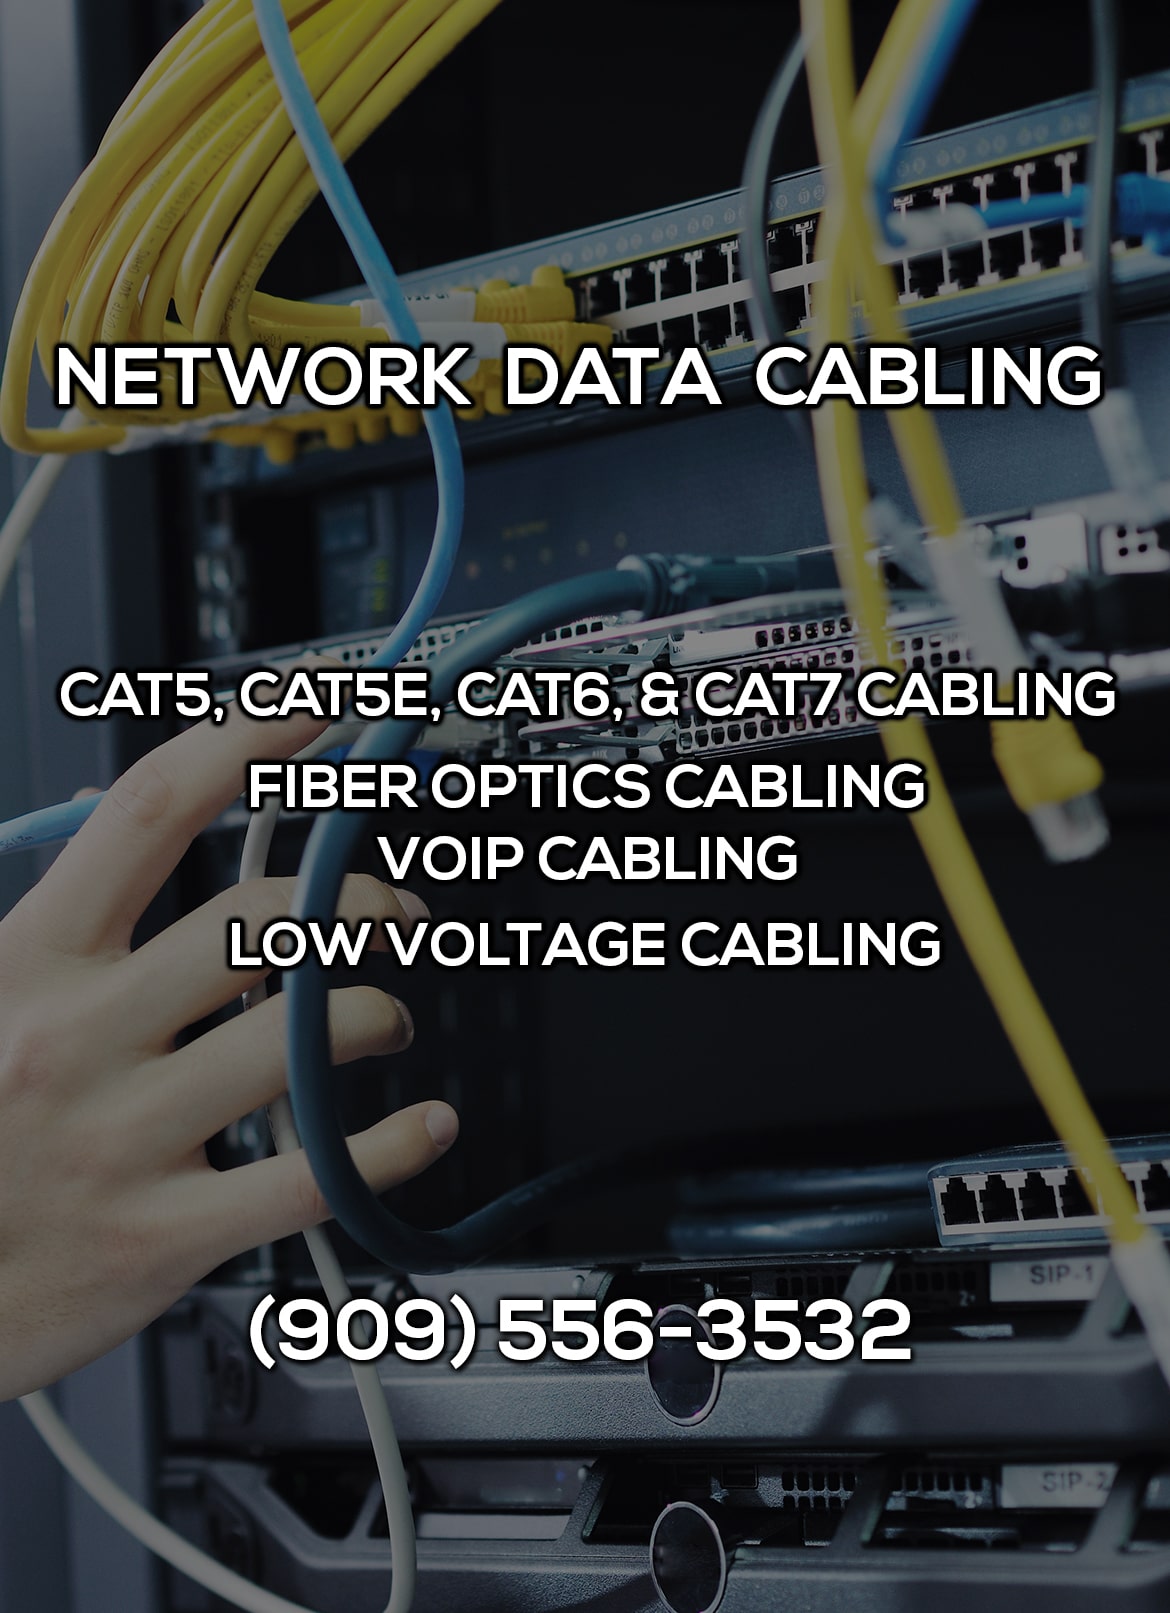 Network Data Cabling in Victorville CA